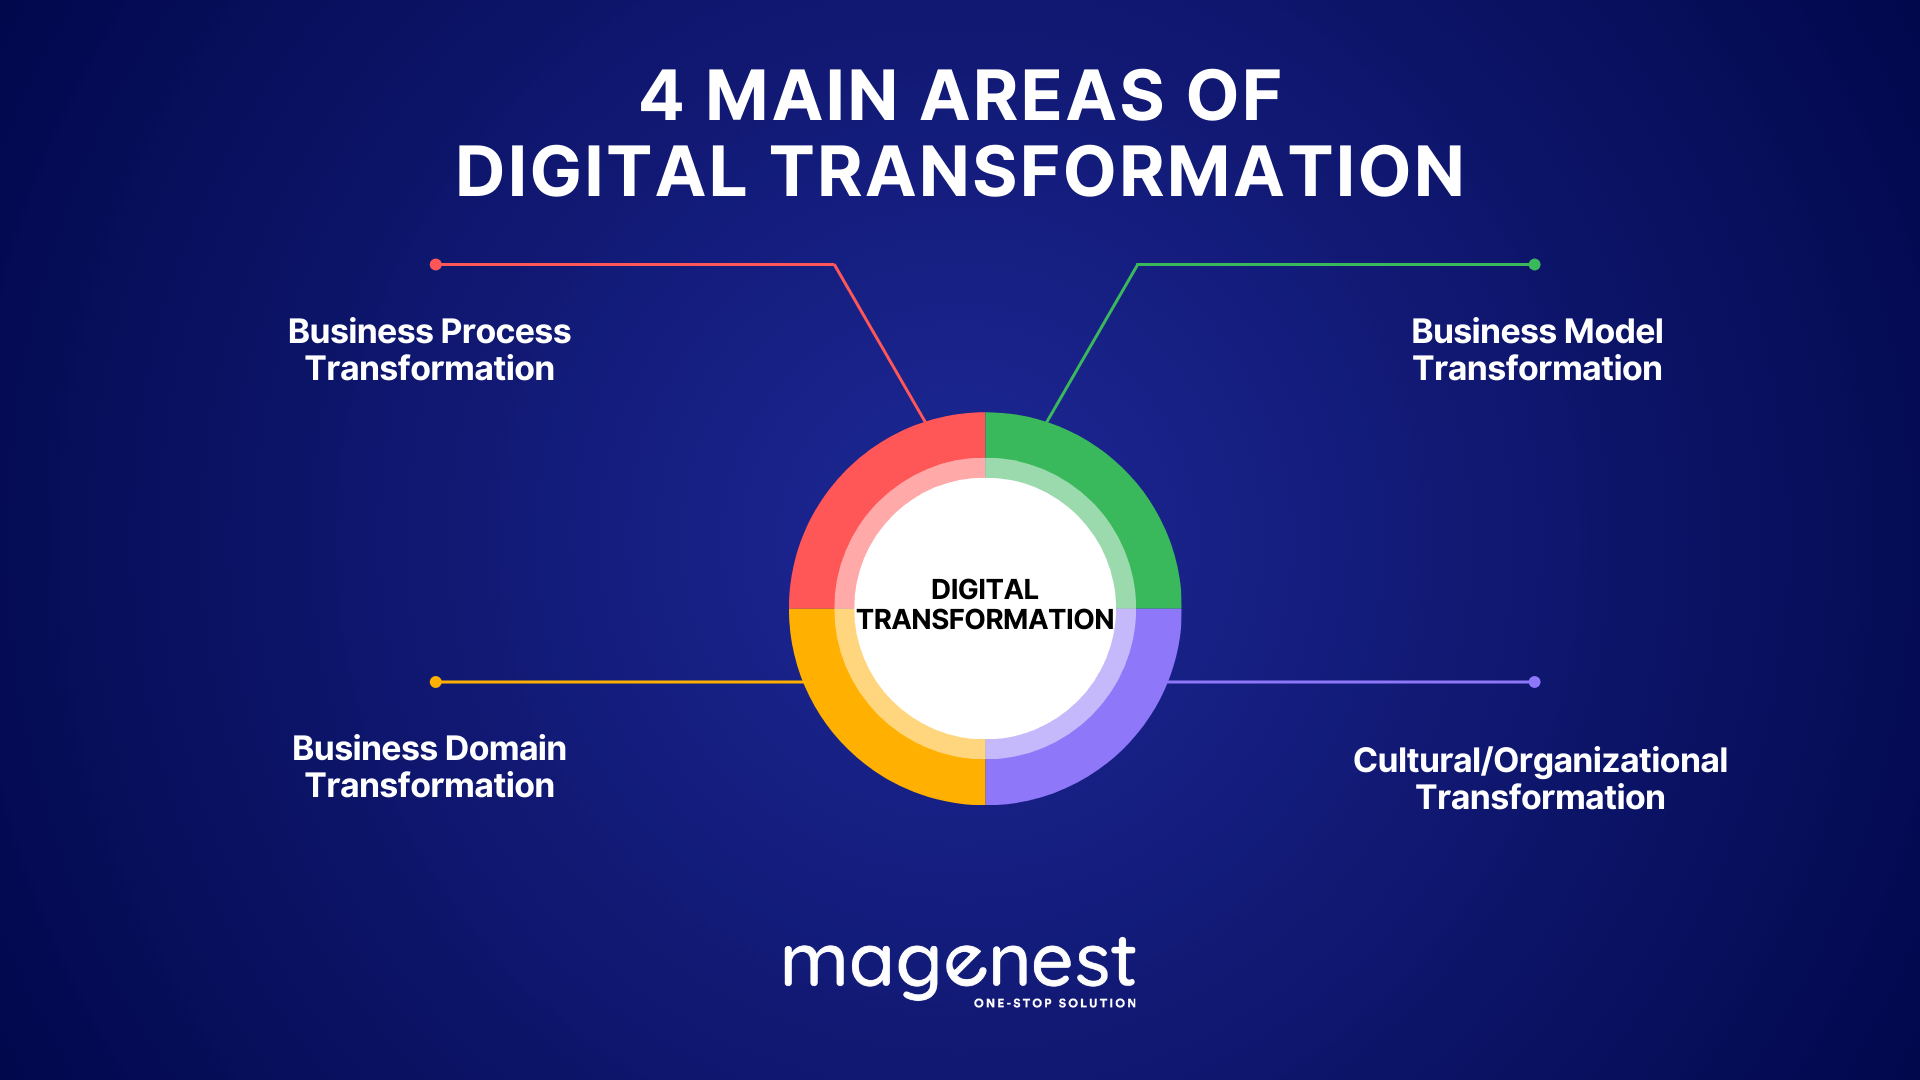 There are 4 main areas of digital transformation